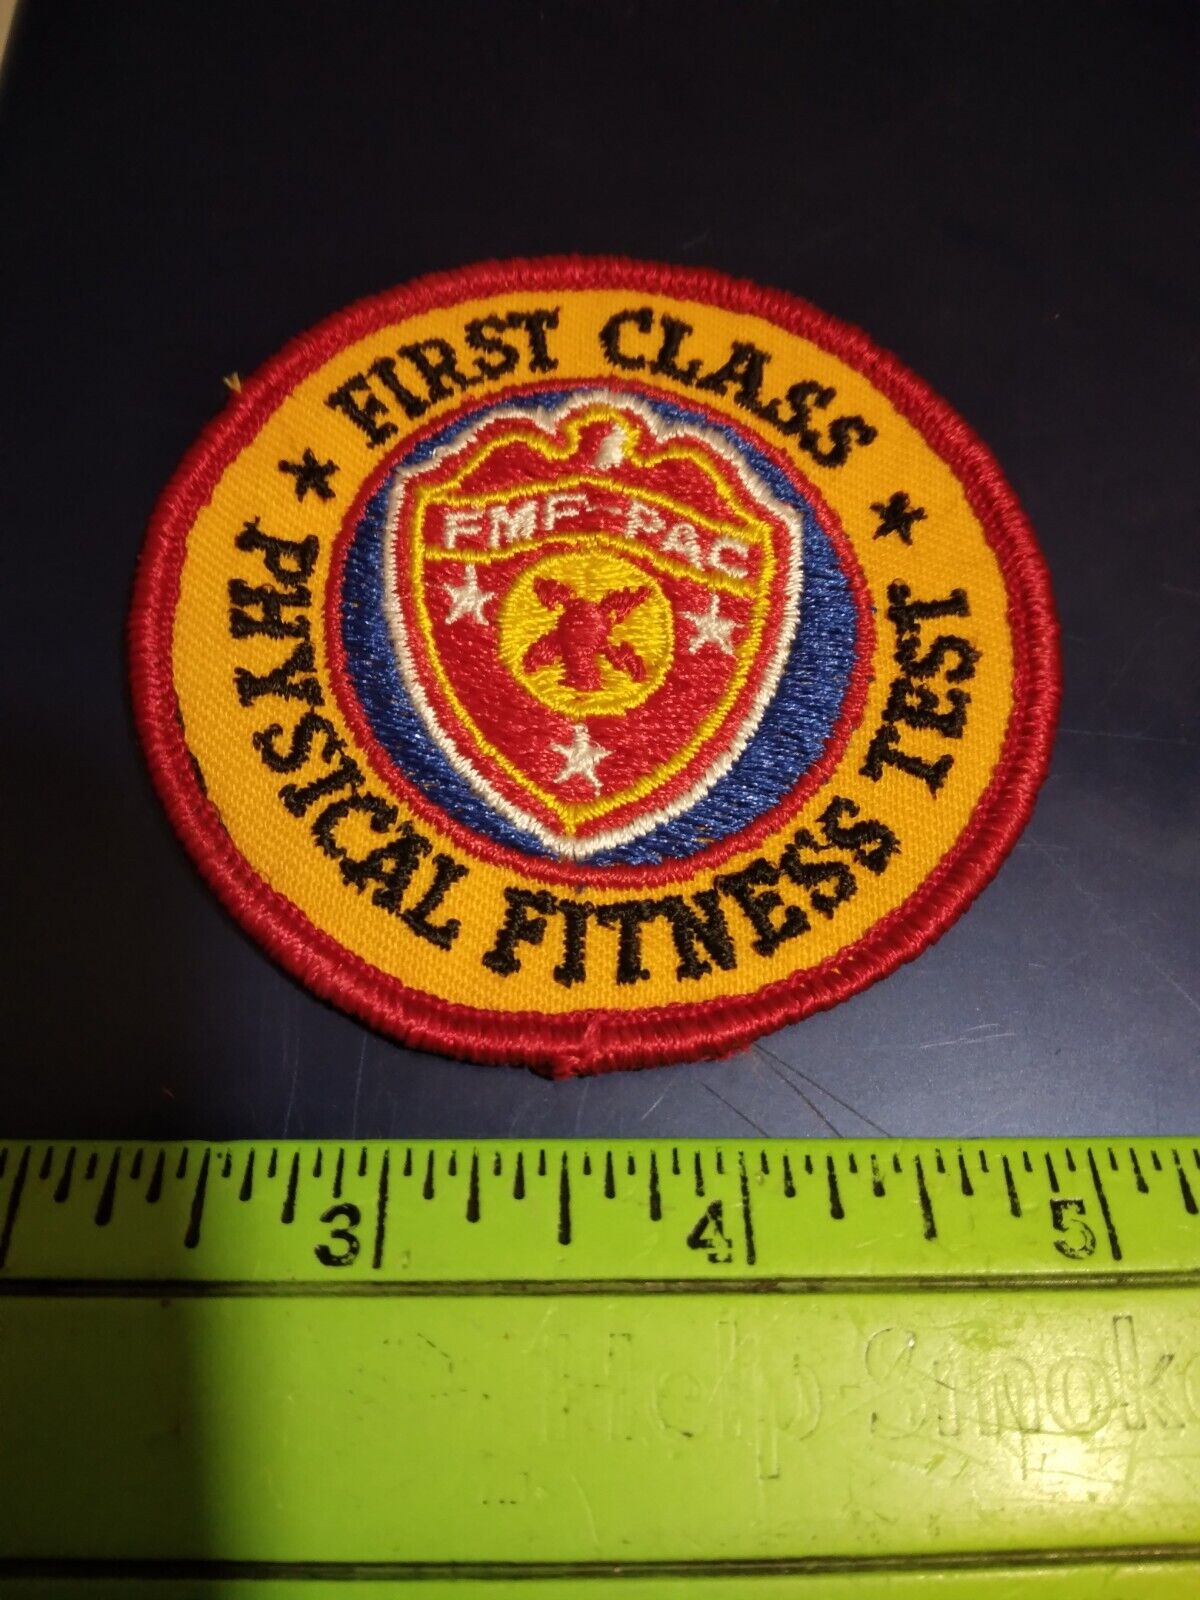 U.S. MARINE CORPS, FMF Pacific- First Class Physical Fitness Test USMC (23-1883)